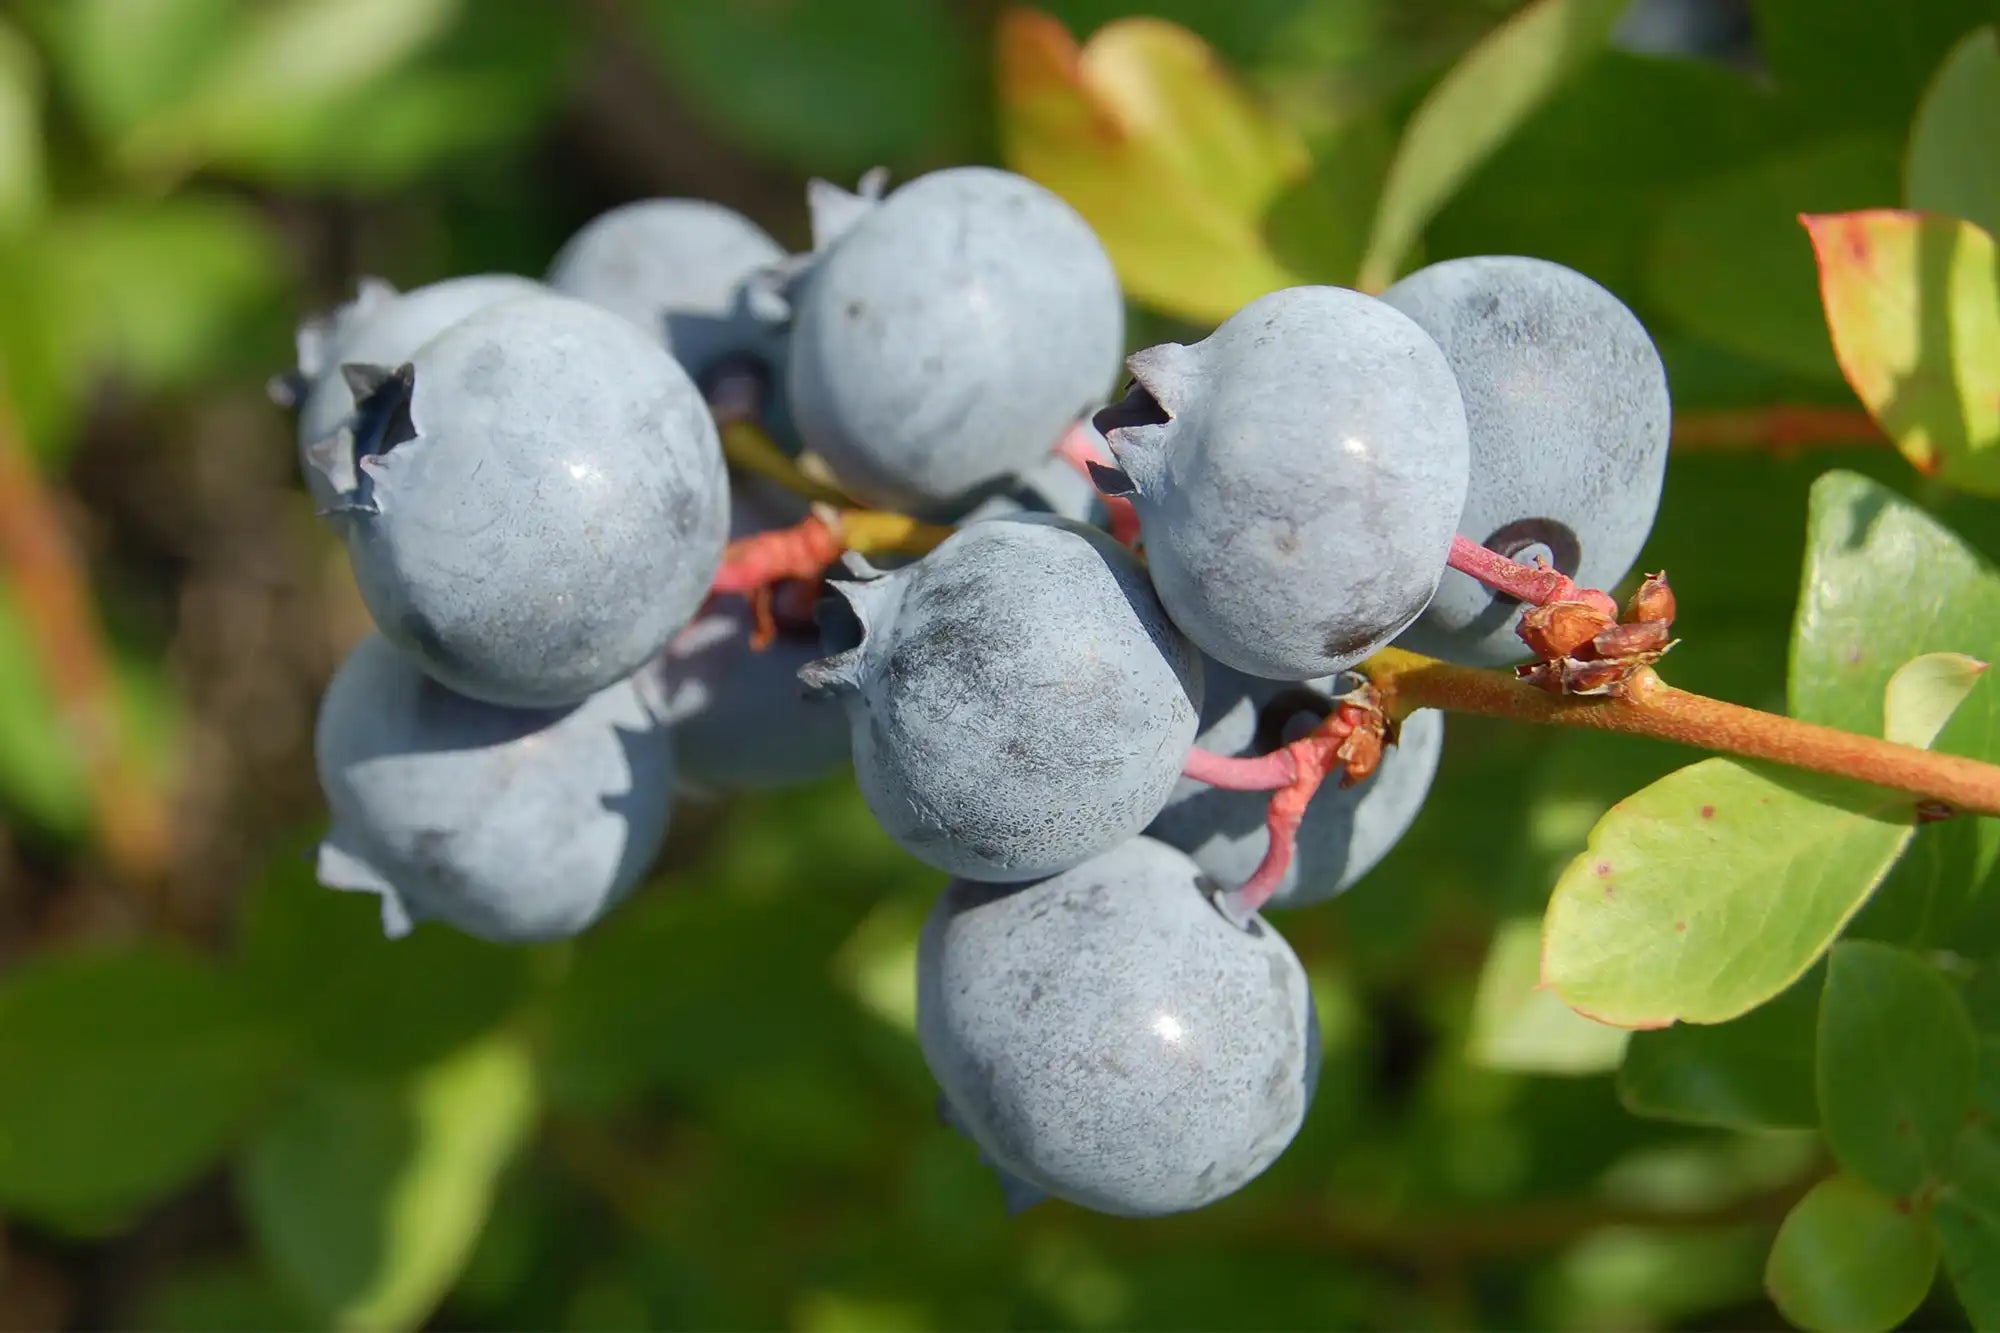 A cluster of Blue Suede blueberries on a stem with lime-colored leaves behind fills the entire frame. The berries are plump and ripe; their dusty blue surface signals they are ready for the picking by someone who likes blueberry pancakes. 